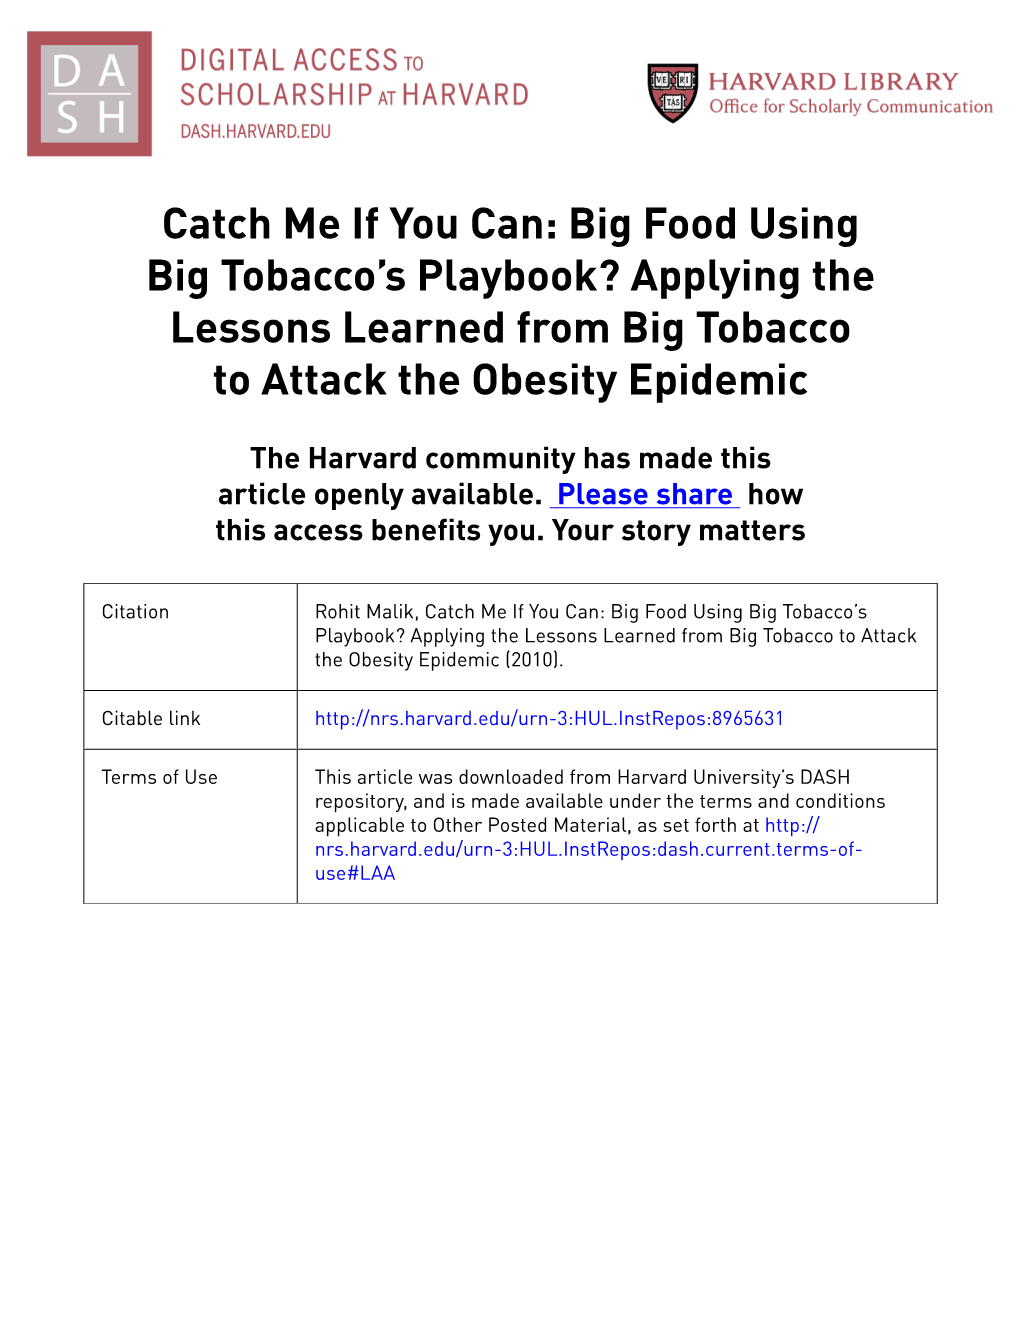 Applying the Lessons Learned from Big Tobacco to Attack the Obesity Epidemic